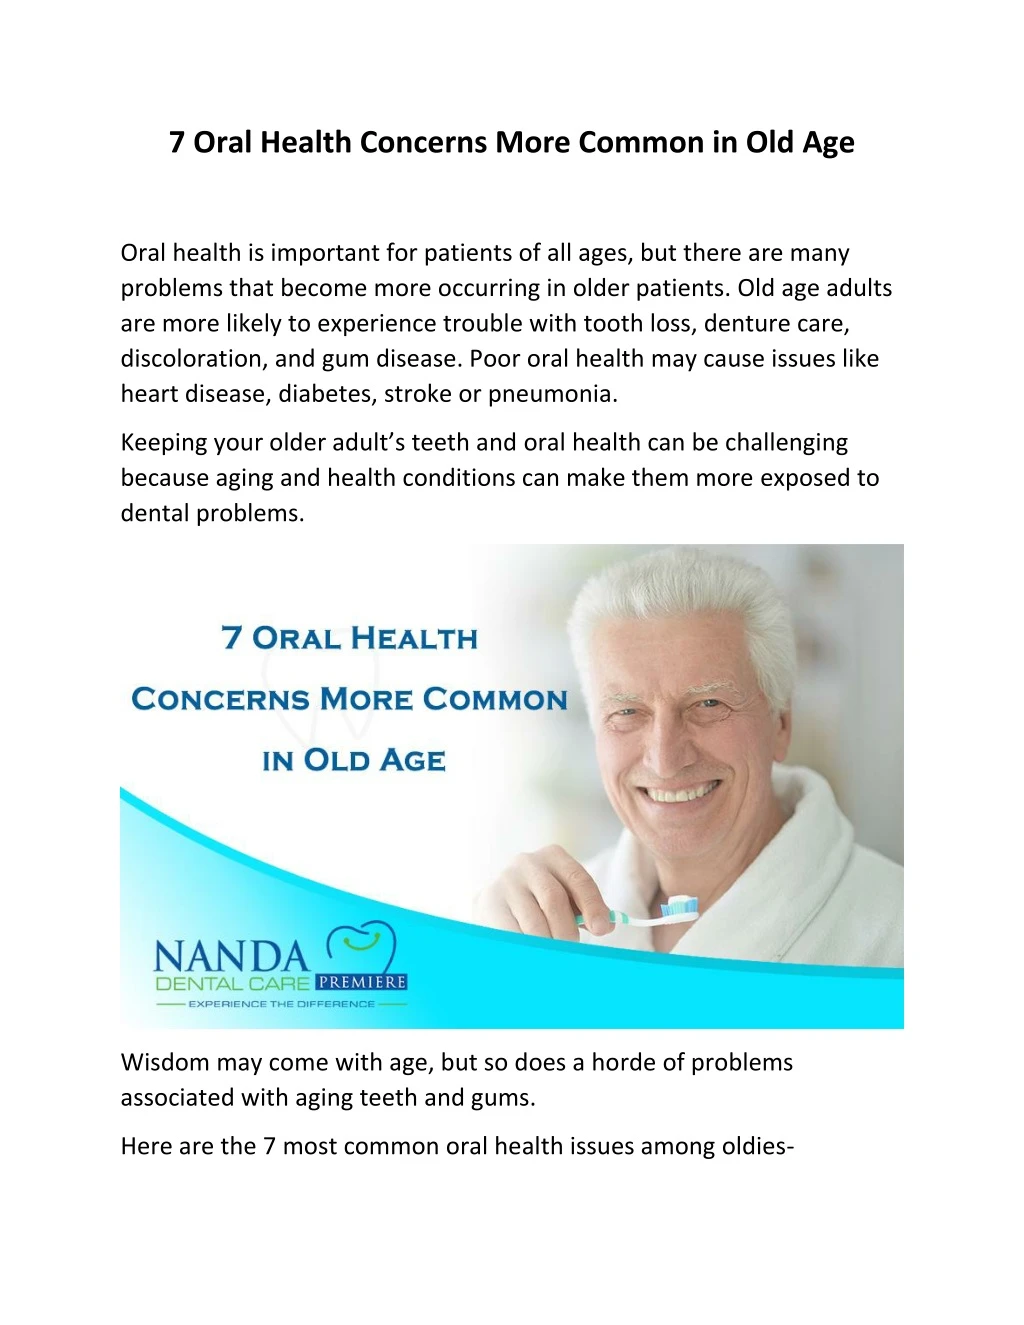 7 oral health concerns more common in old age